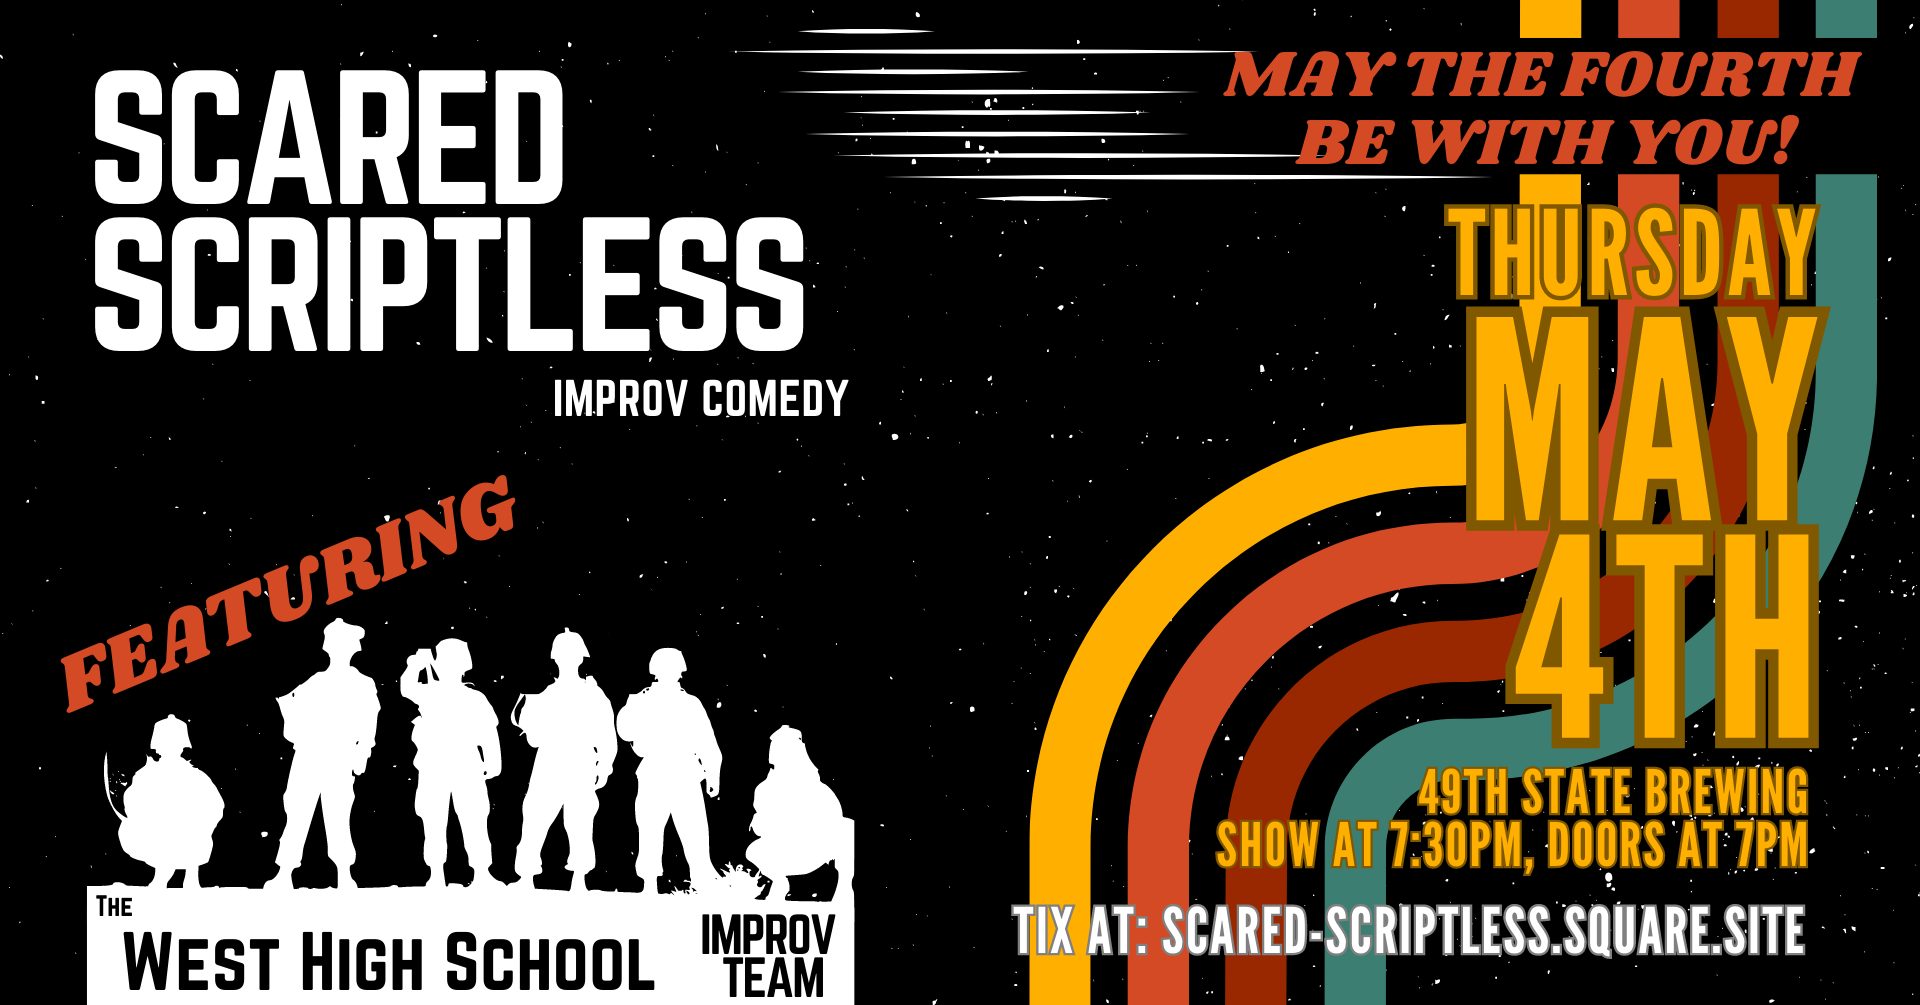 Scared Scriptless comedy improv show at 49th State Brewing in downtown Anchorage